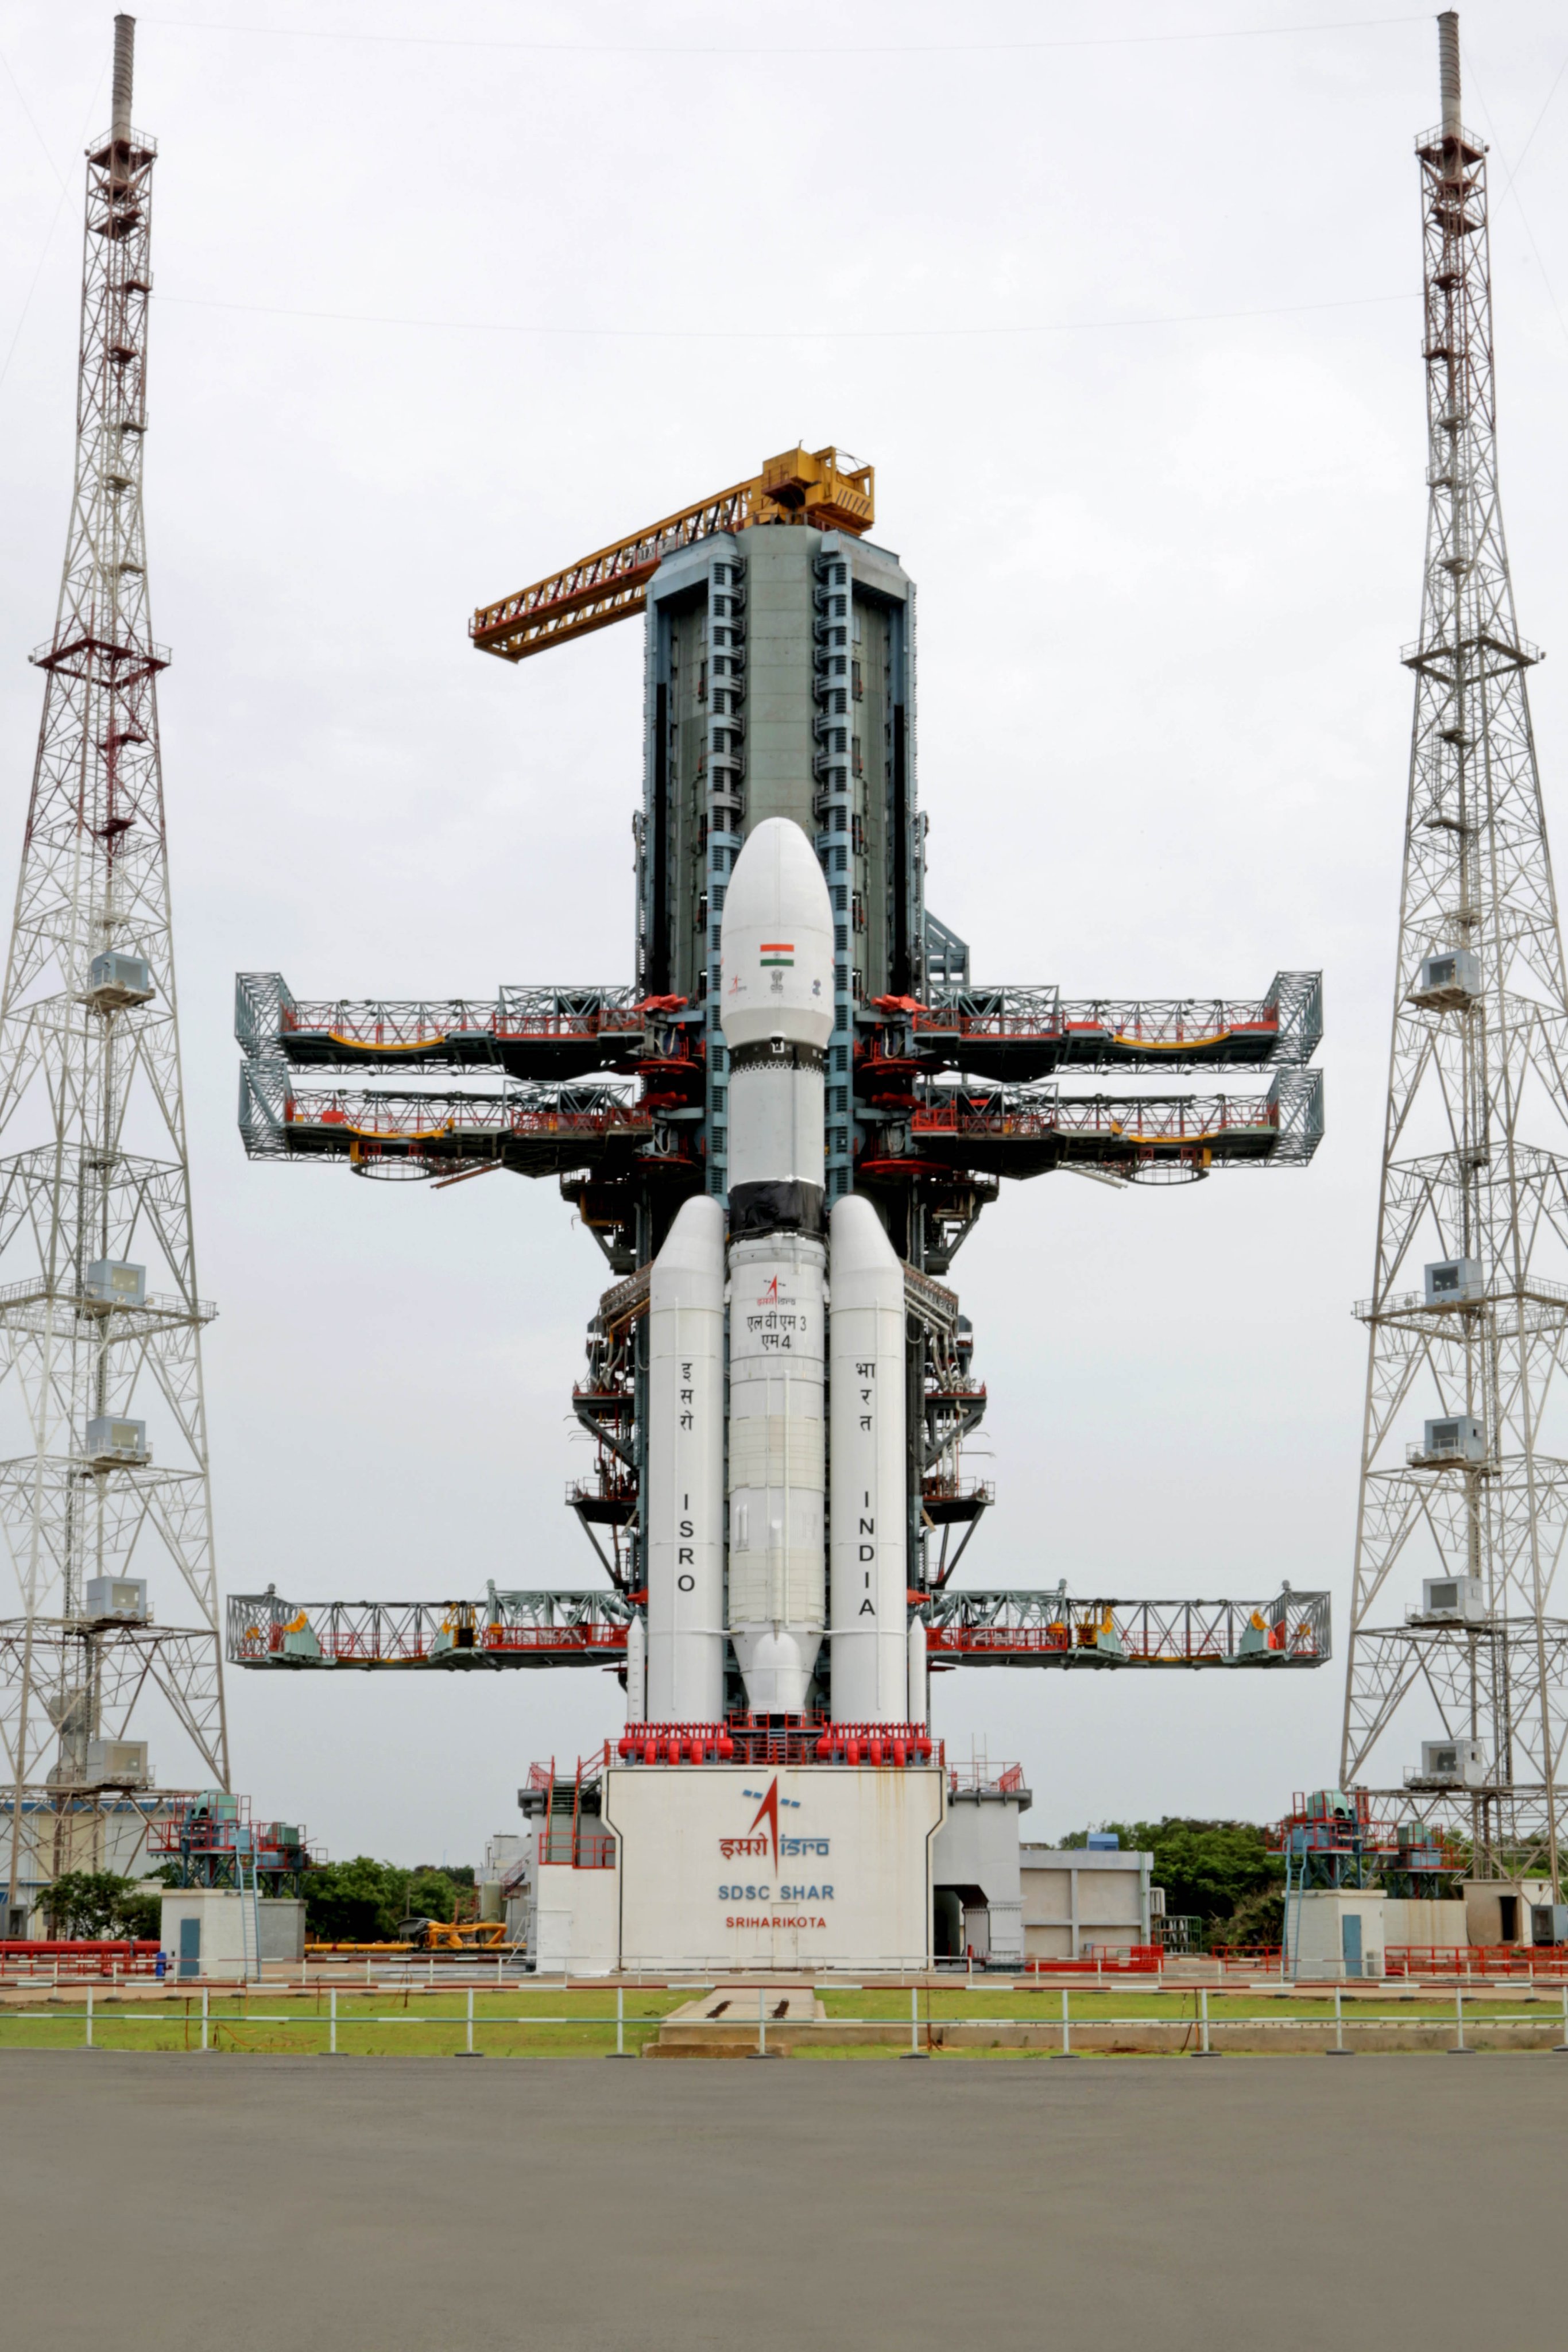 All India Radio News on Twitter: "Indian Space Research Organisation #ISRO  to launch #Chandrayaan3 by LVM3 rocket at 2.35 pm today from Sriharikota.  https://t.co/8f5cBjXlnY" / Twitter